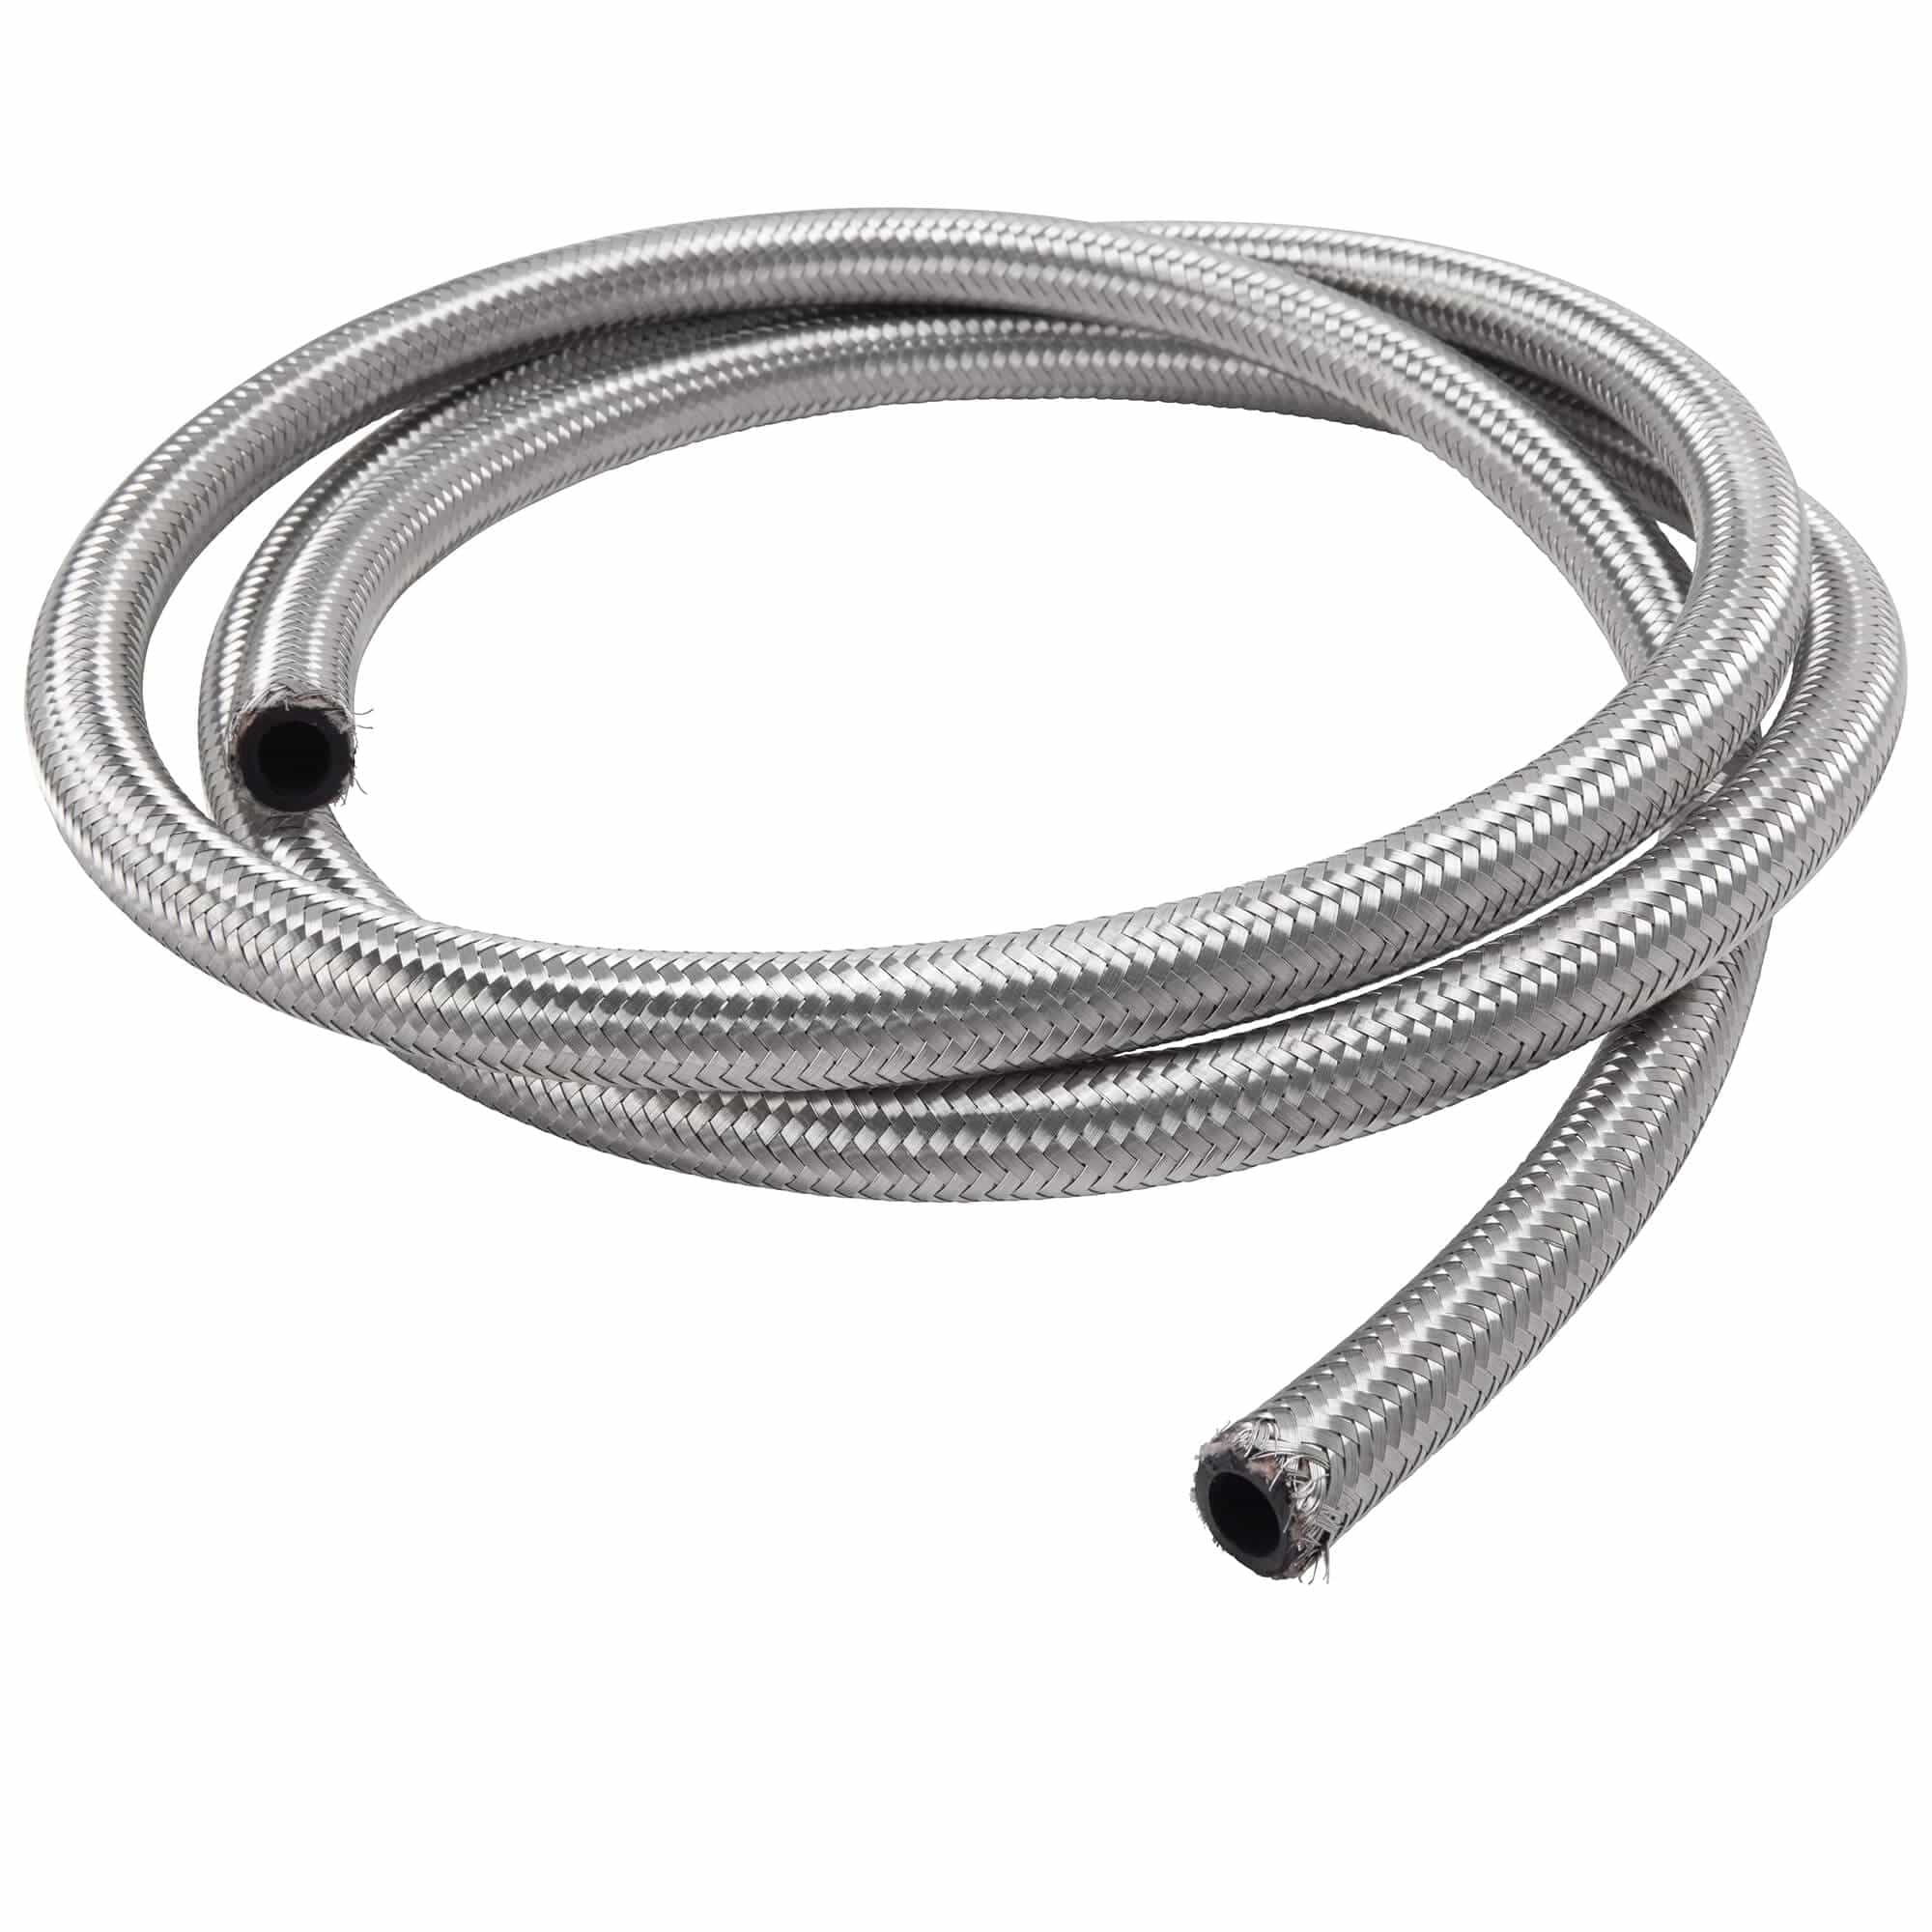 Cycle Standard 3/8 inch Braided Stainless Fuel Line - 6 ft